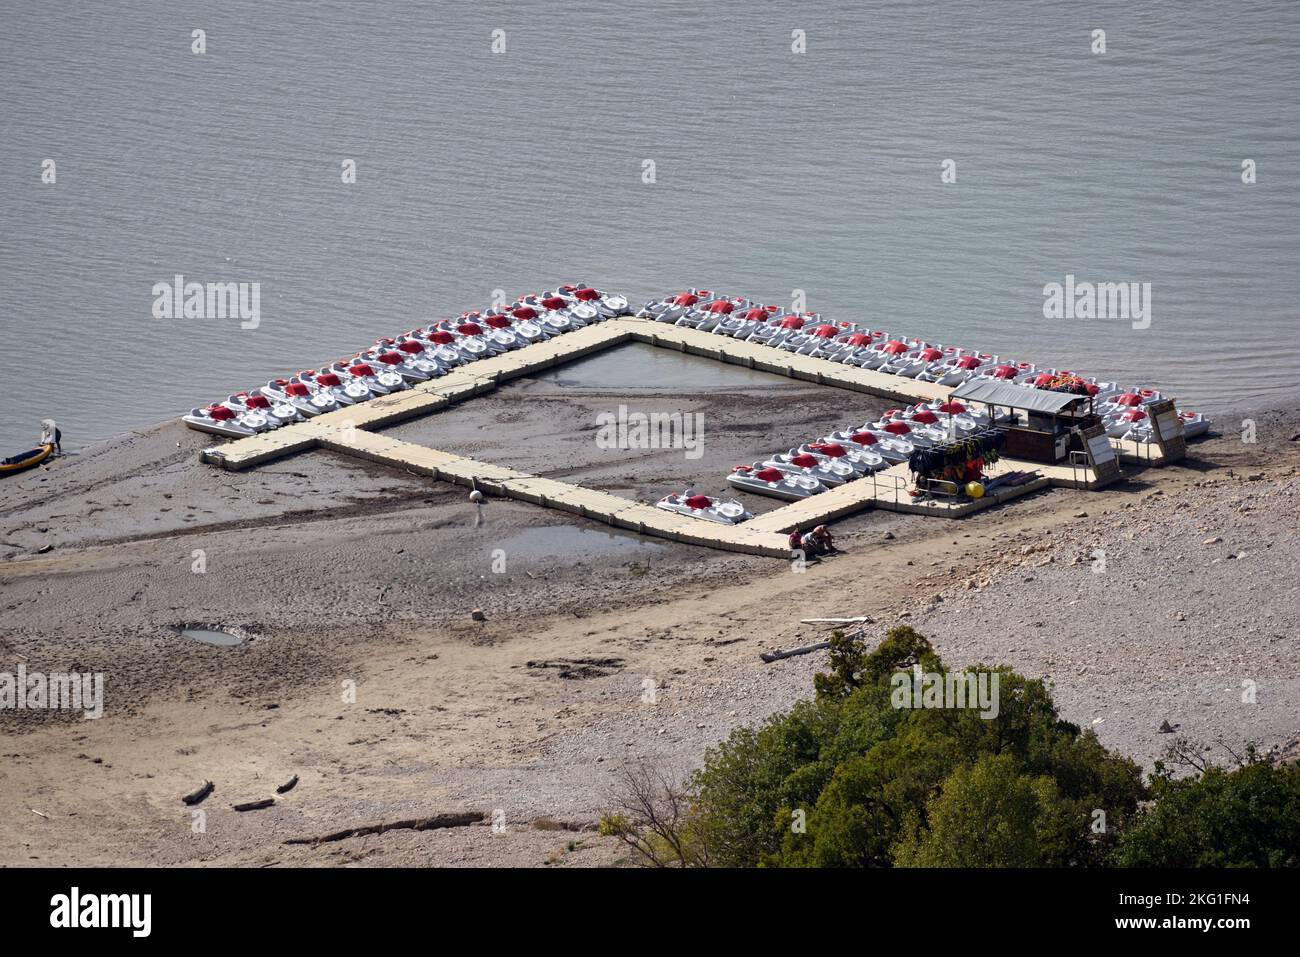 Low Water Level Exposing Boat Pontoon during Drought Saint Croix Lake Var Provence France Stock Photo